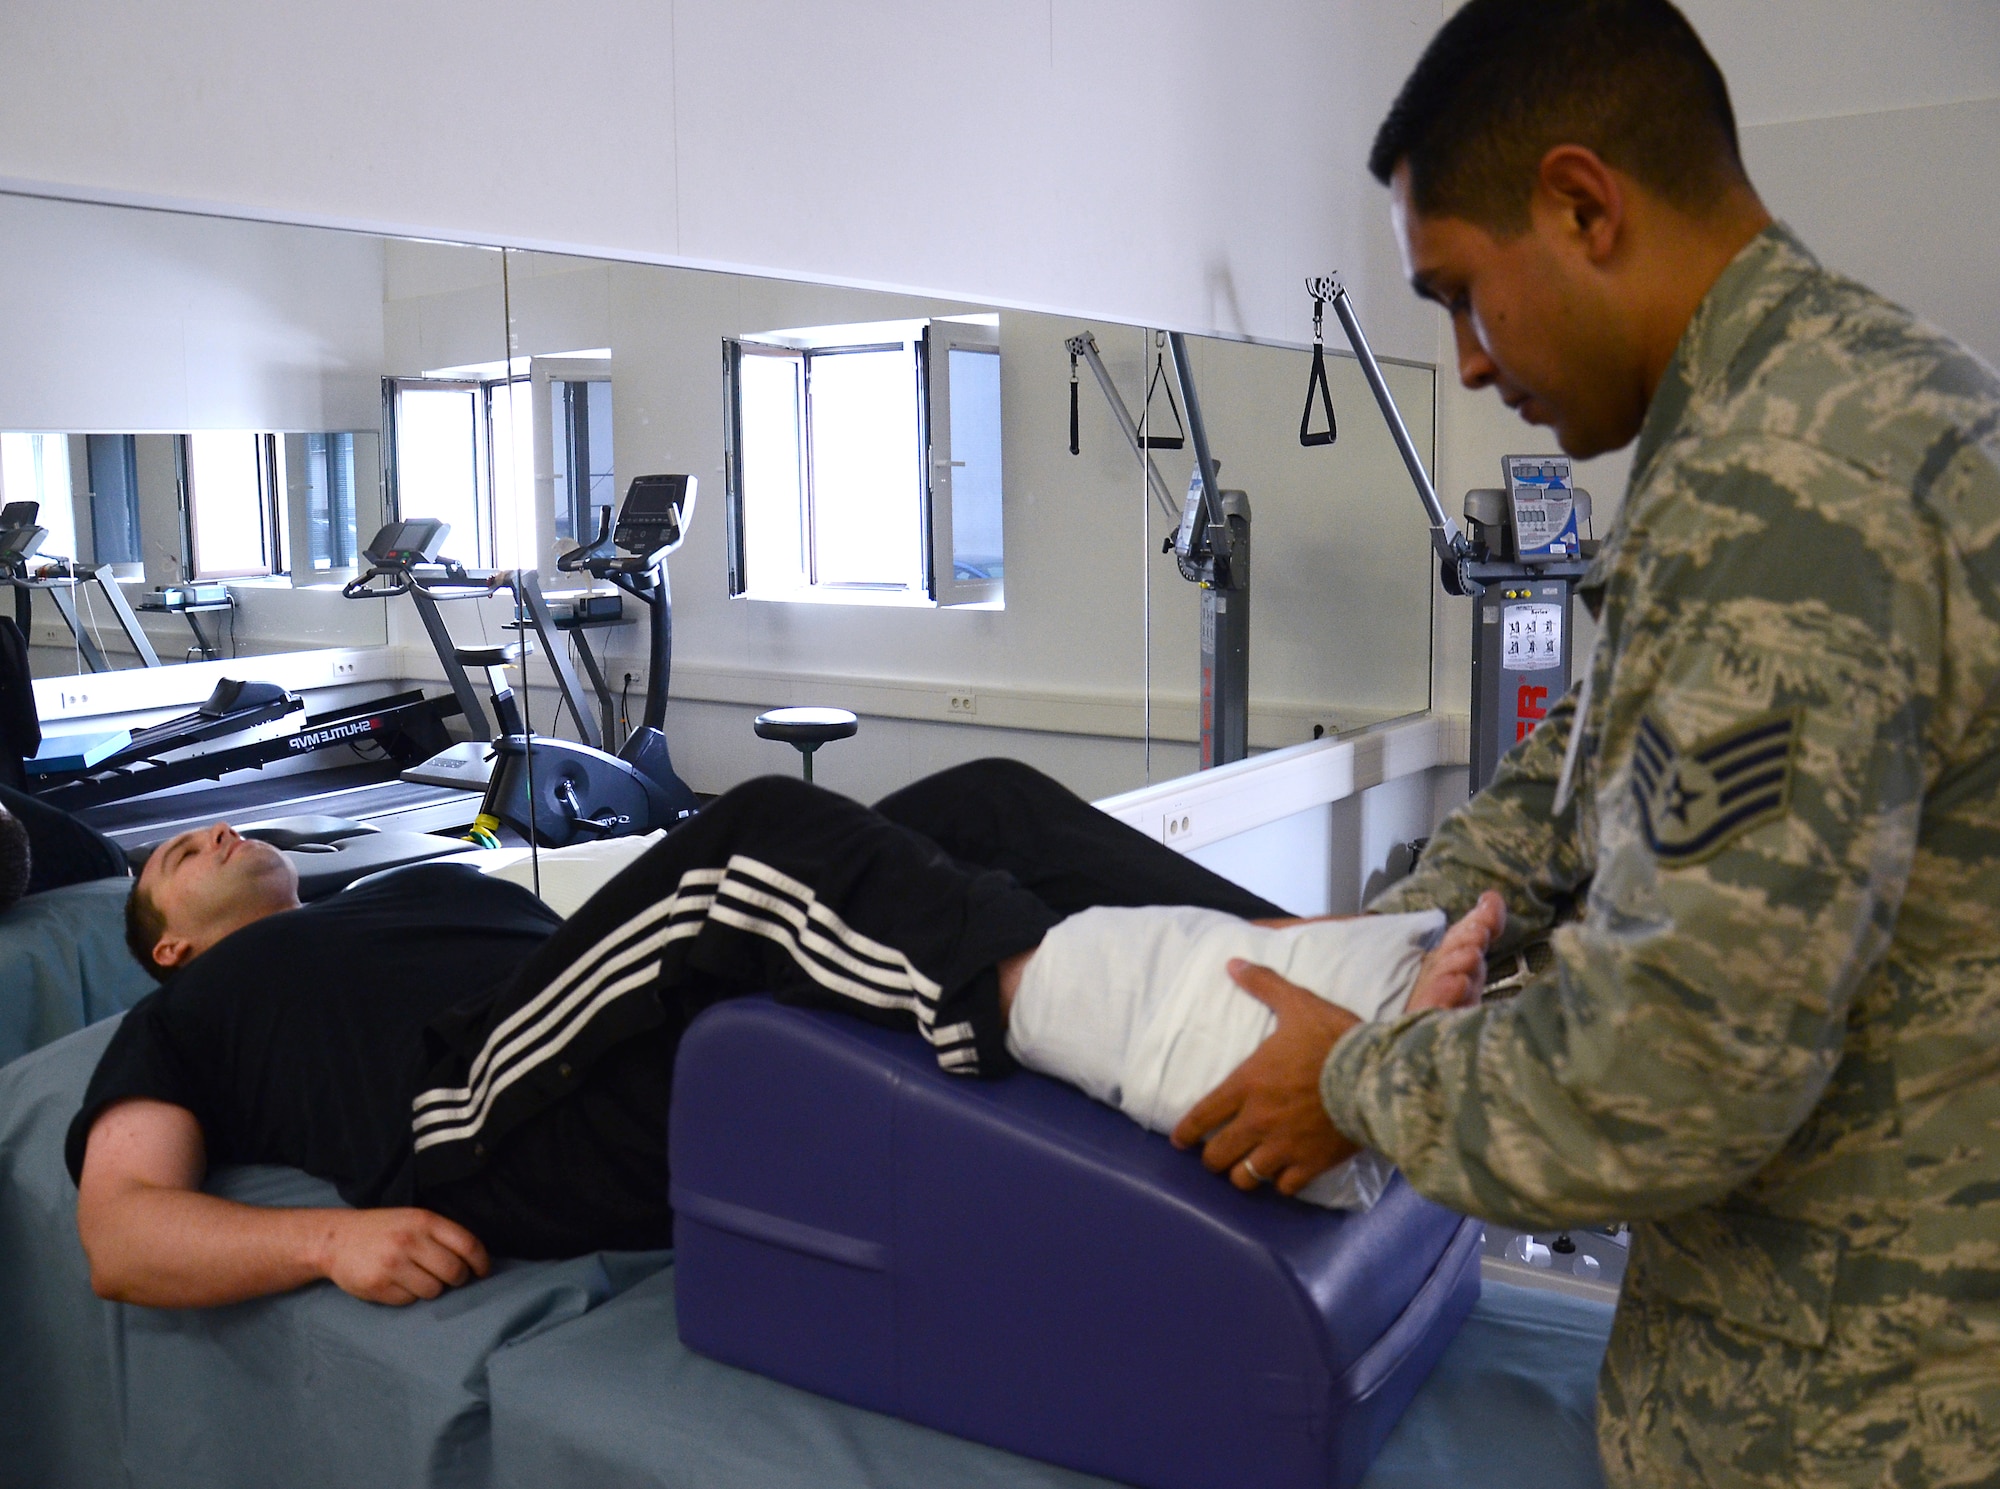 Staff Sgt. Mario Jimenez, 86th Medical Operations Squadron Physical Therapy technician, applies an ice pack to the ankle of Senior Airman James Harrod, 693rd Intelligence, Surveillance and Reconnaissance Group operations training manager, at the end of a physical therapy session at Ramstein Air Base, Germany, Aug. 19, 2014. Without formal treatment and physical therapy, service members run the risk of re-injuring themselves and causing greater damage to an area. (U.S. Air Force photo/Senior Airman Timothy Moore)